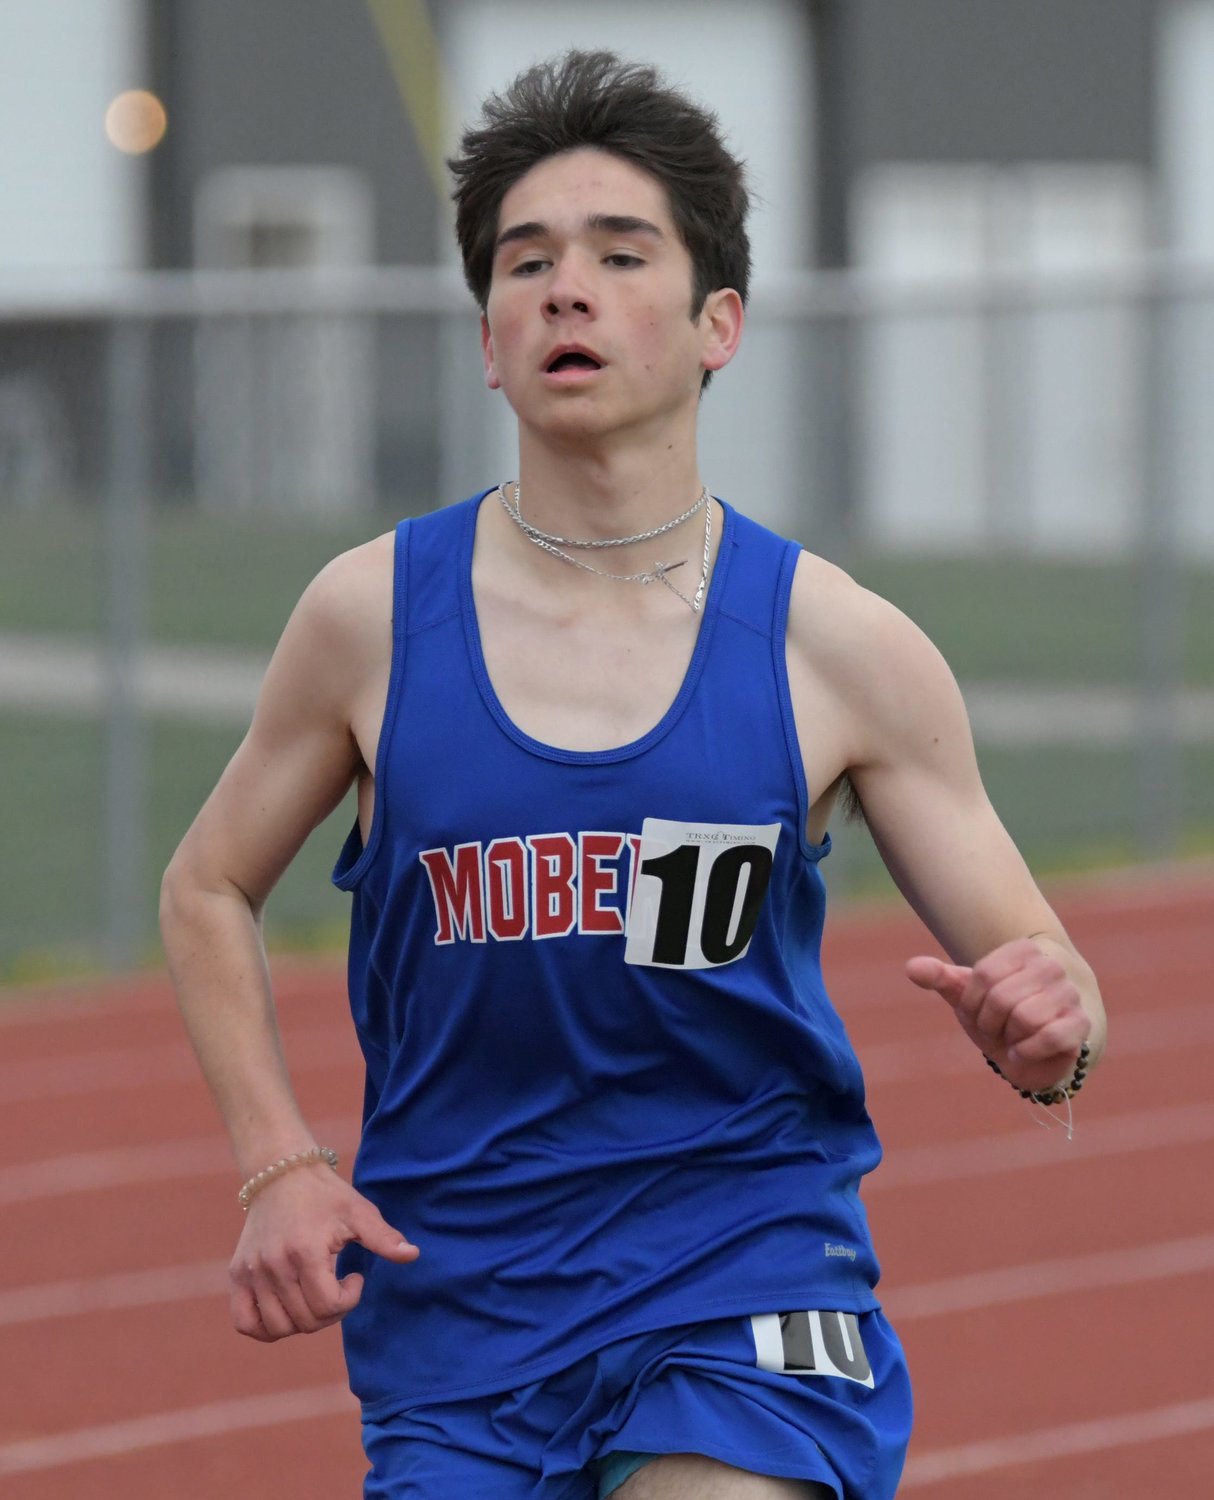 Moberly High School senior track &amp; field athlete Antonio Rivera had a second place time of 10 minutes, 47.50 seconds in the boys 3200m run Friday, April 23 at the Ron Whittaker Bulldog Track Classic held at Mexico.